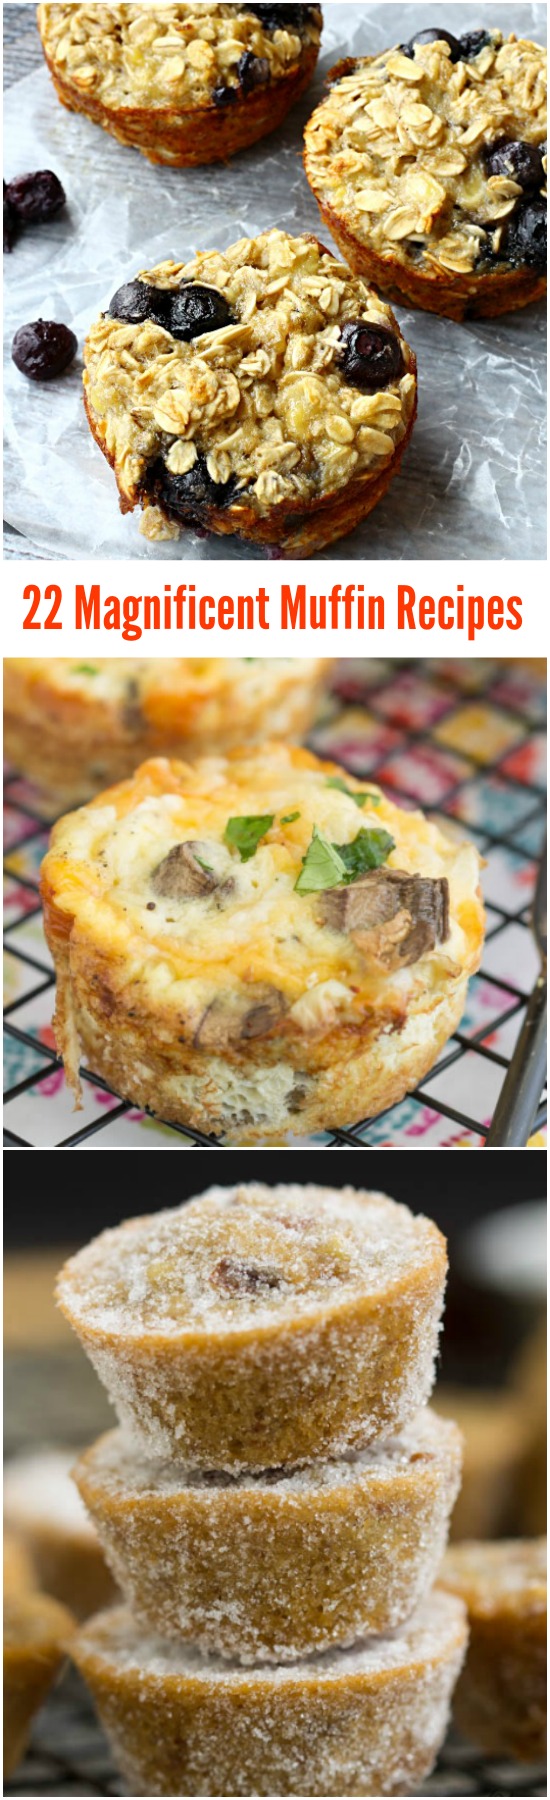 22 truly magnificent muffin recipes